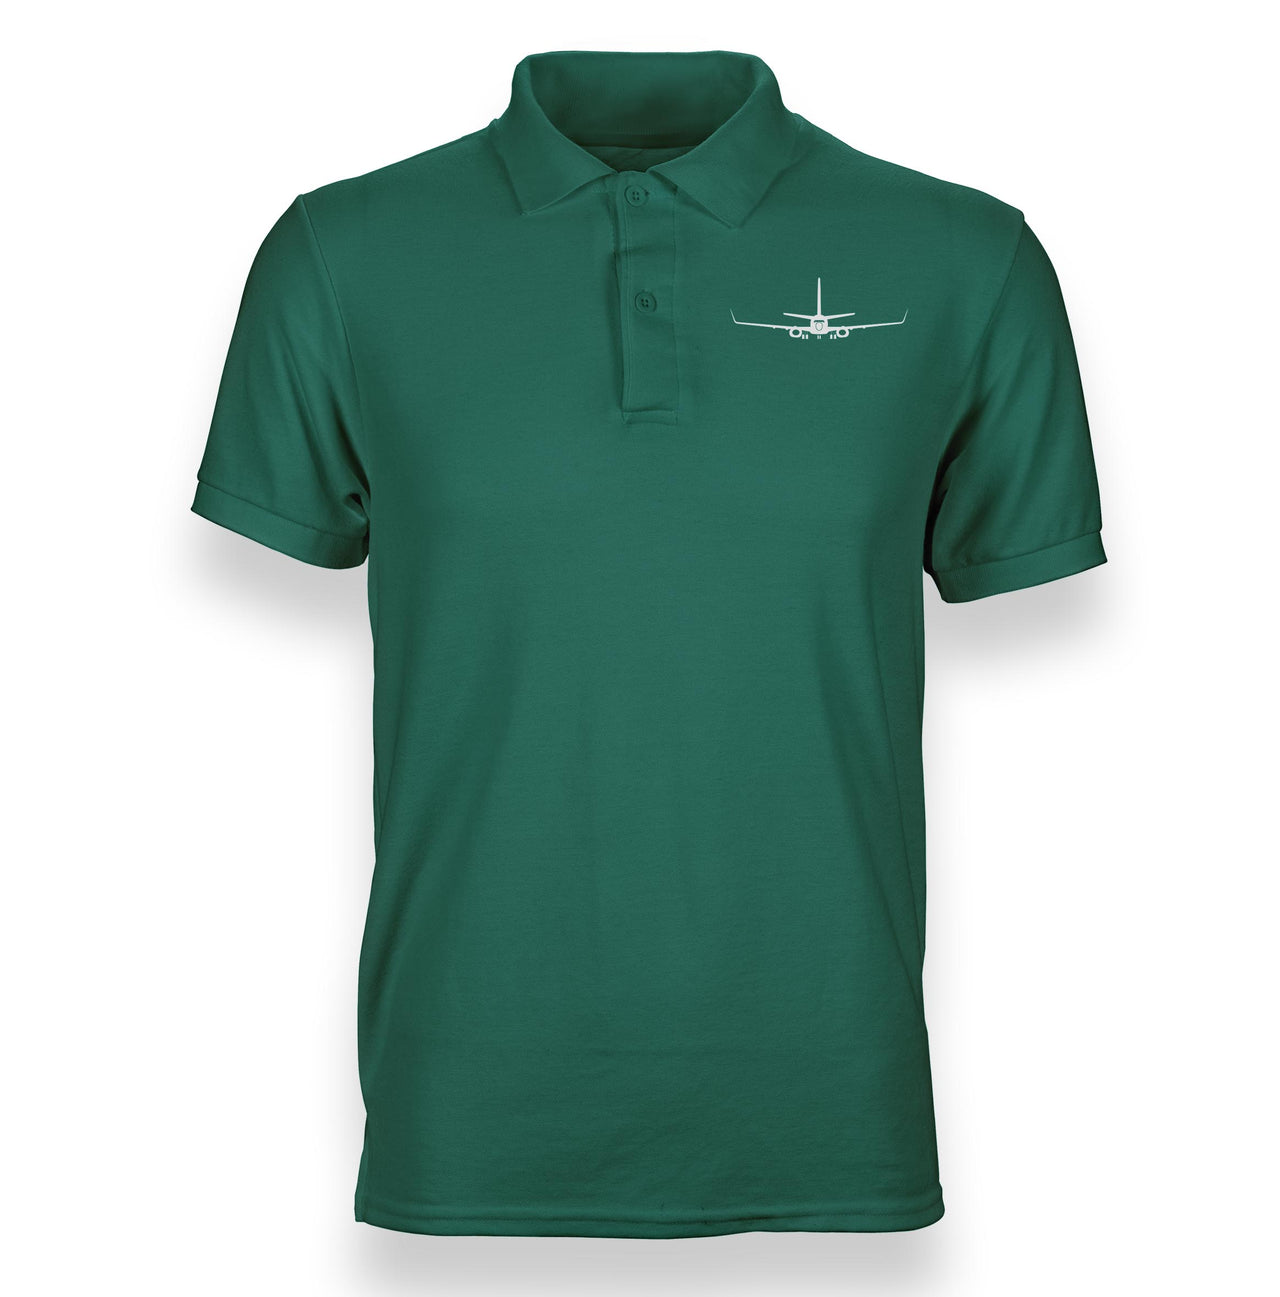 Boeing 737-800NG Silhouette Designed Polo T-Shirts